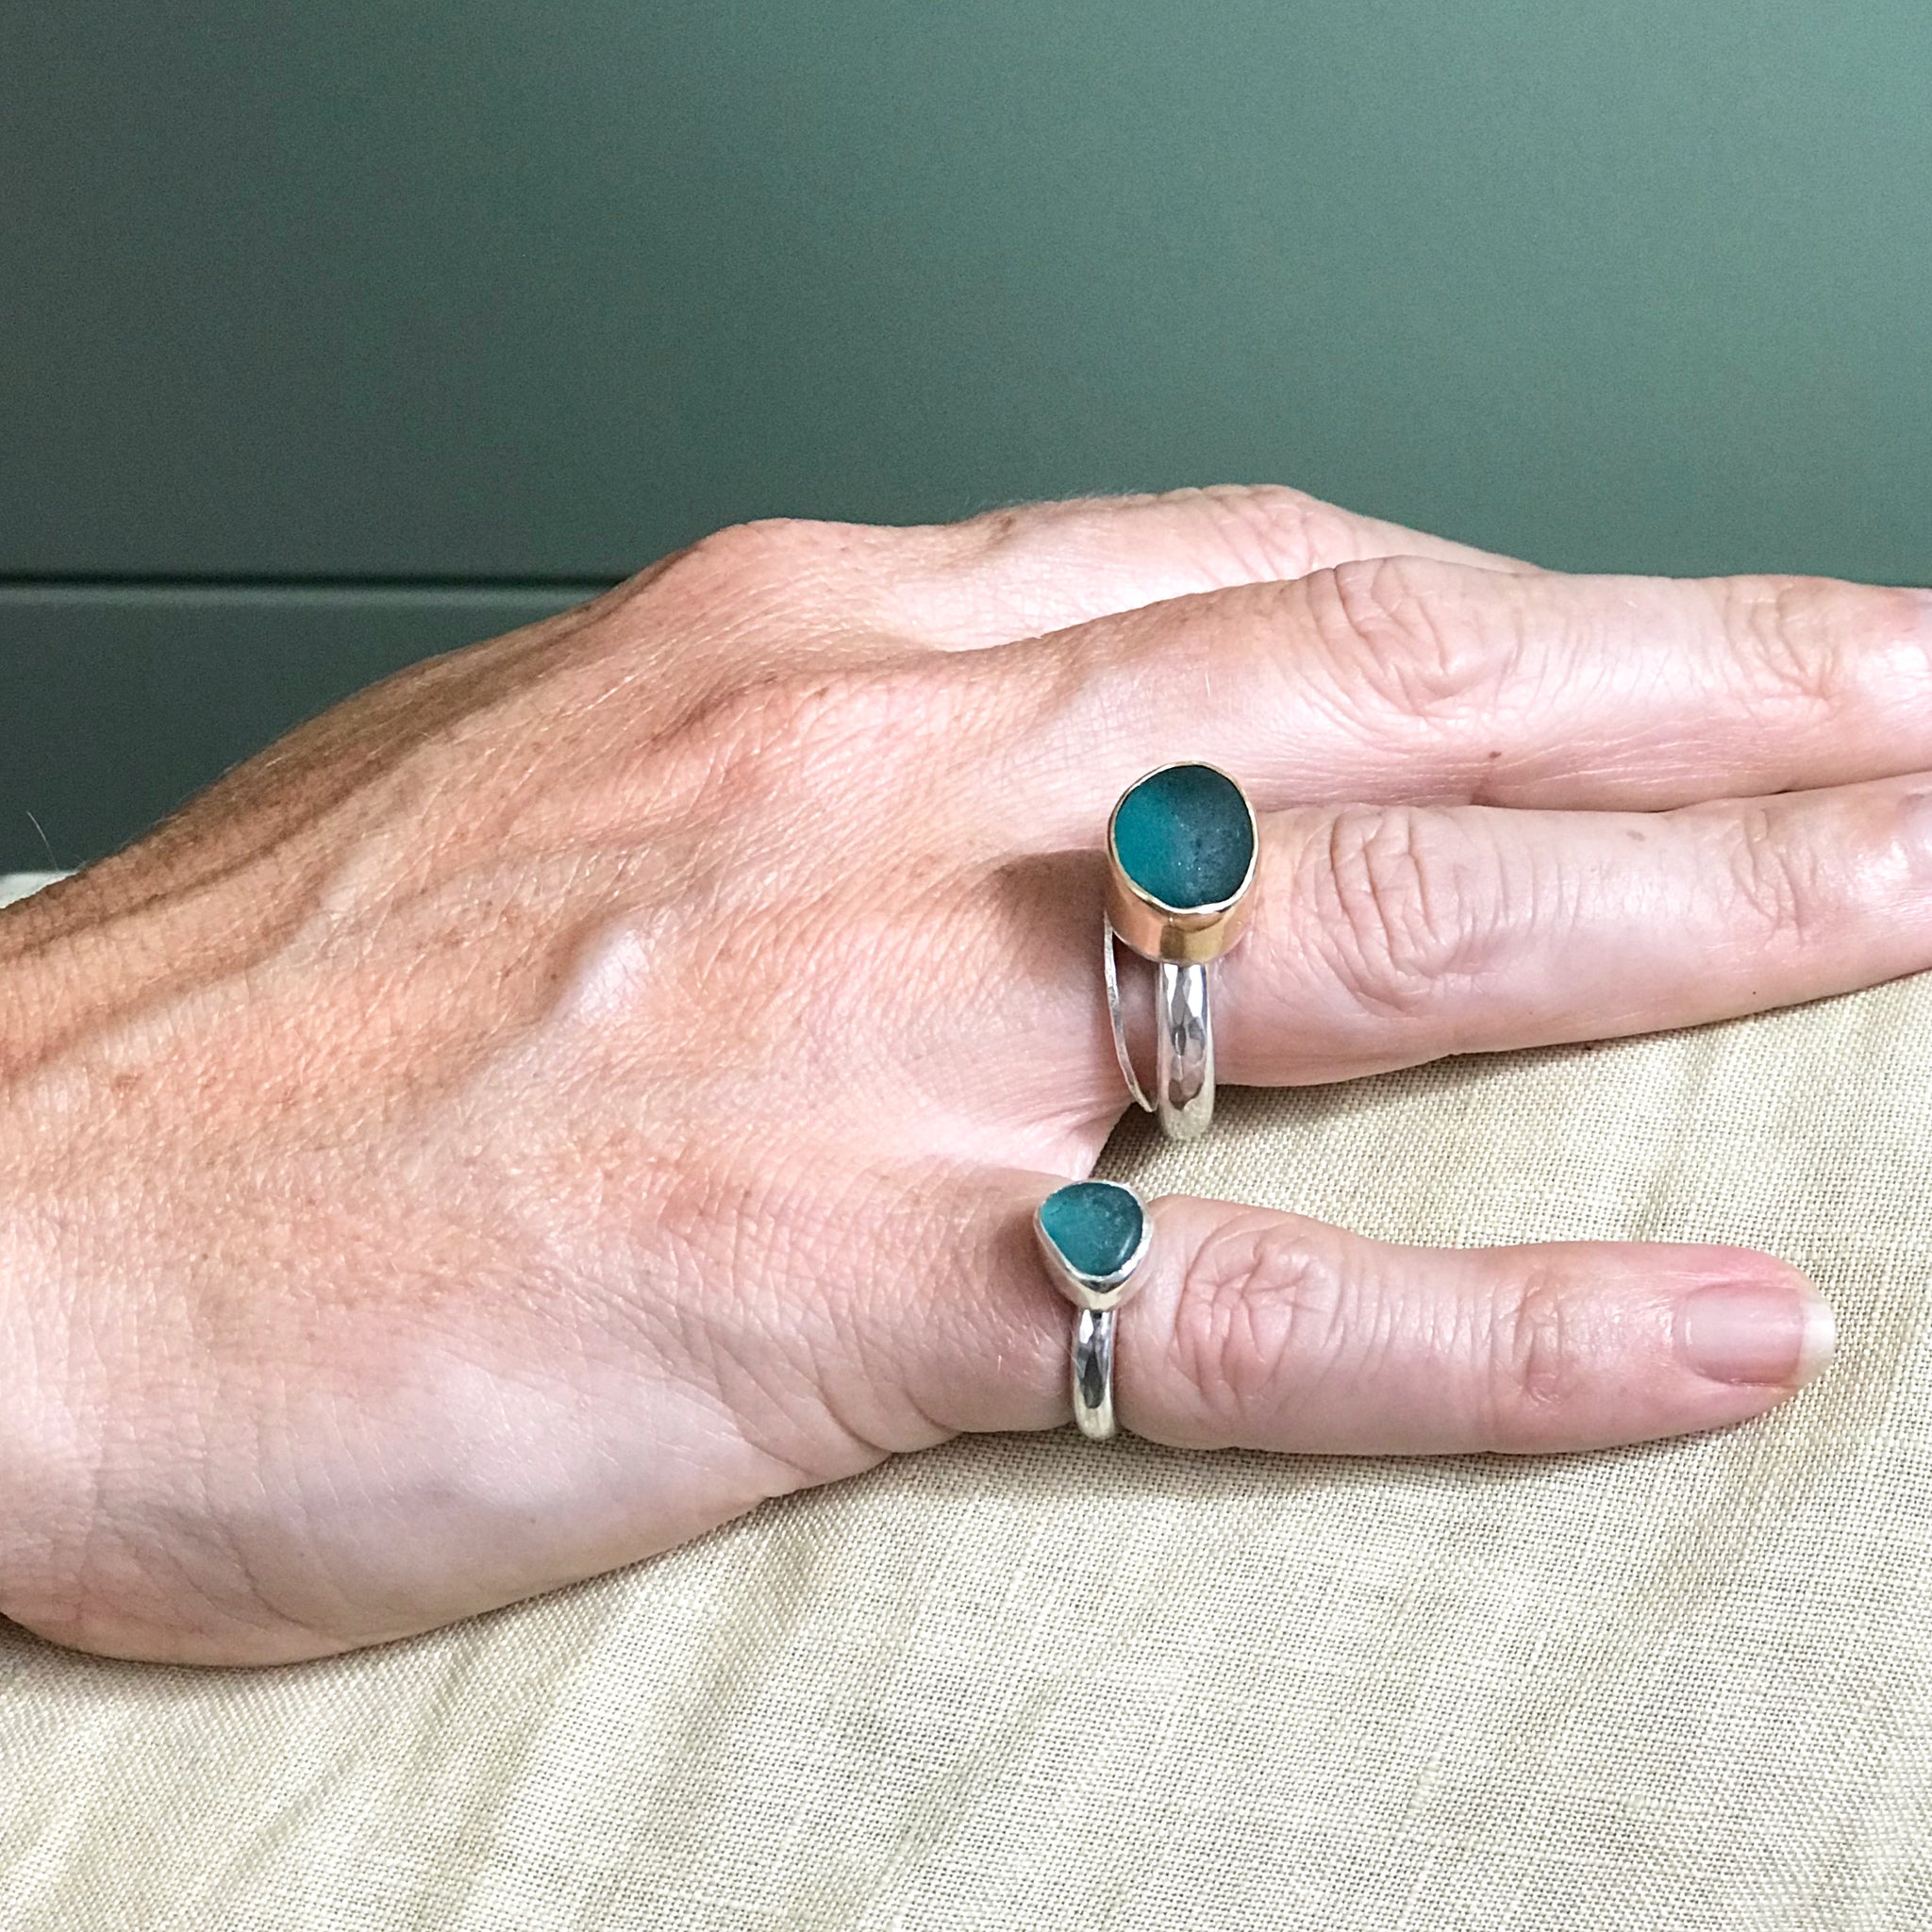 Teal Seaglass Ring – Sterling Silver with Gold Bezel – Made to Order